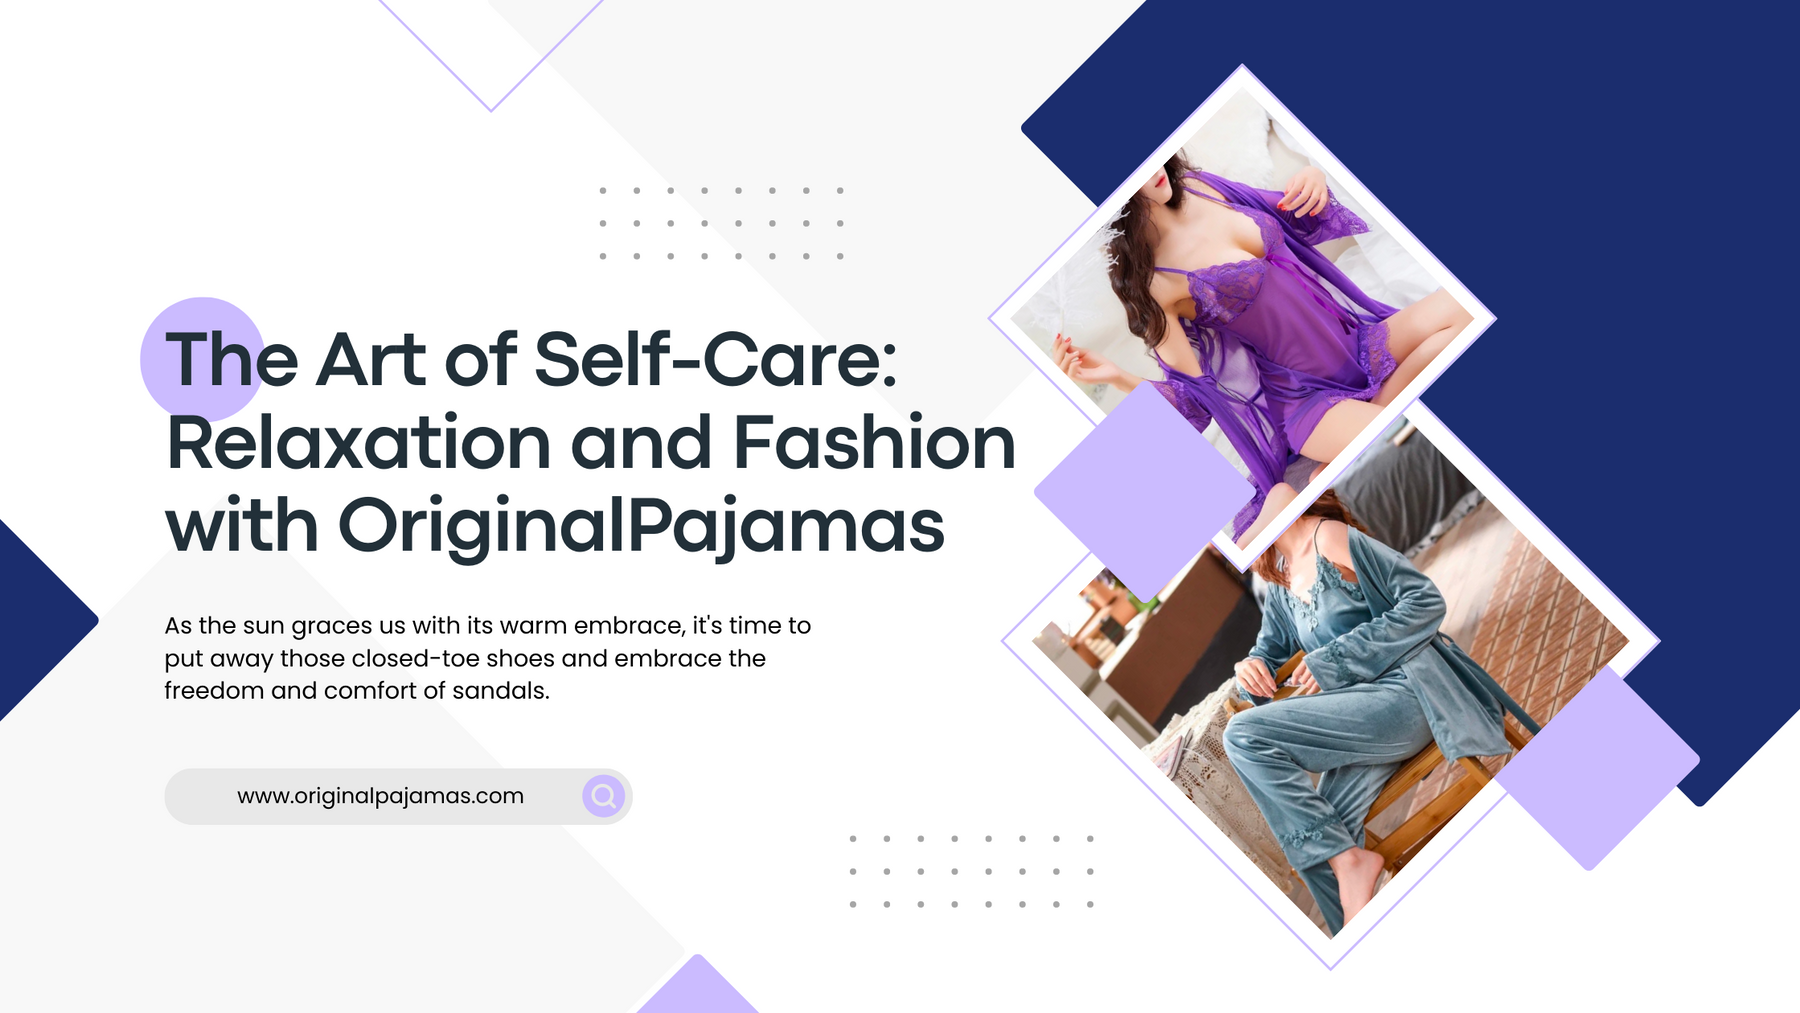 The Art of Self-Care: Relaxation and Fashion with OriginalPajamas